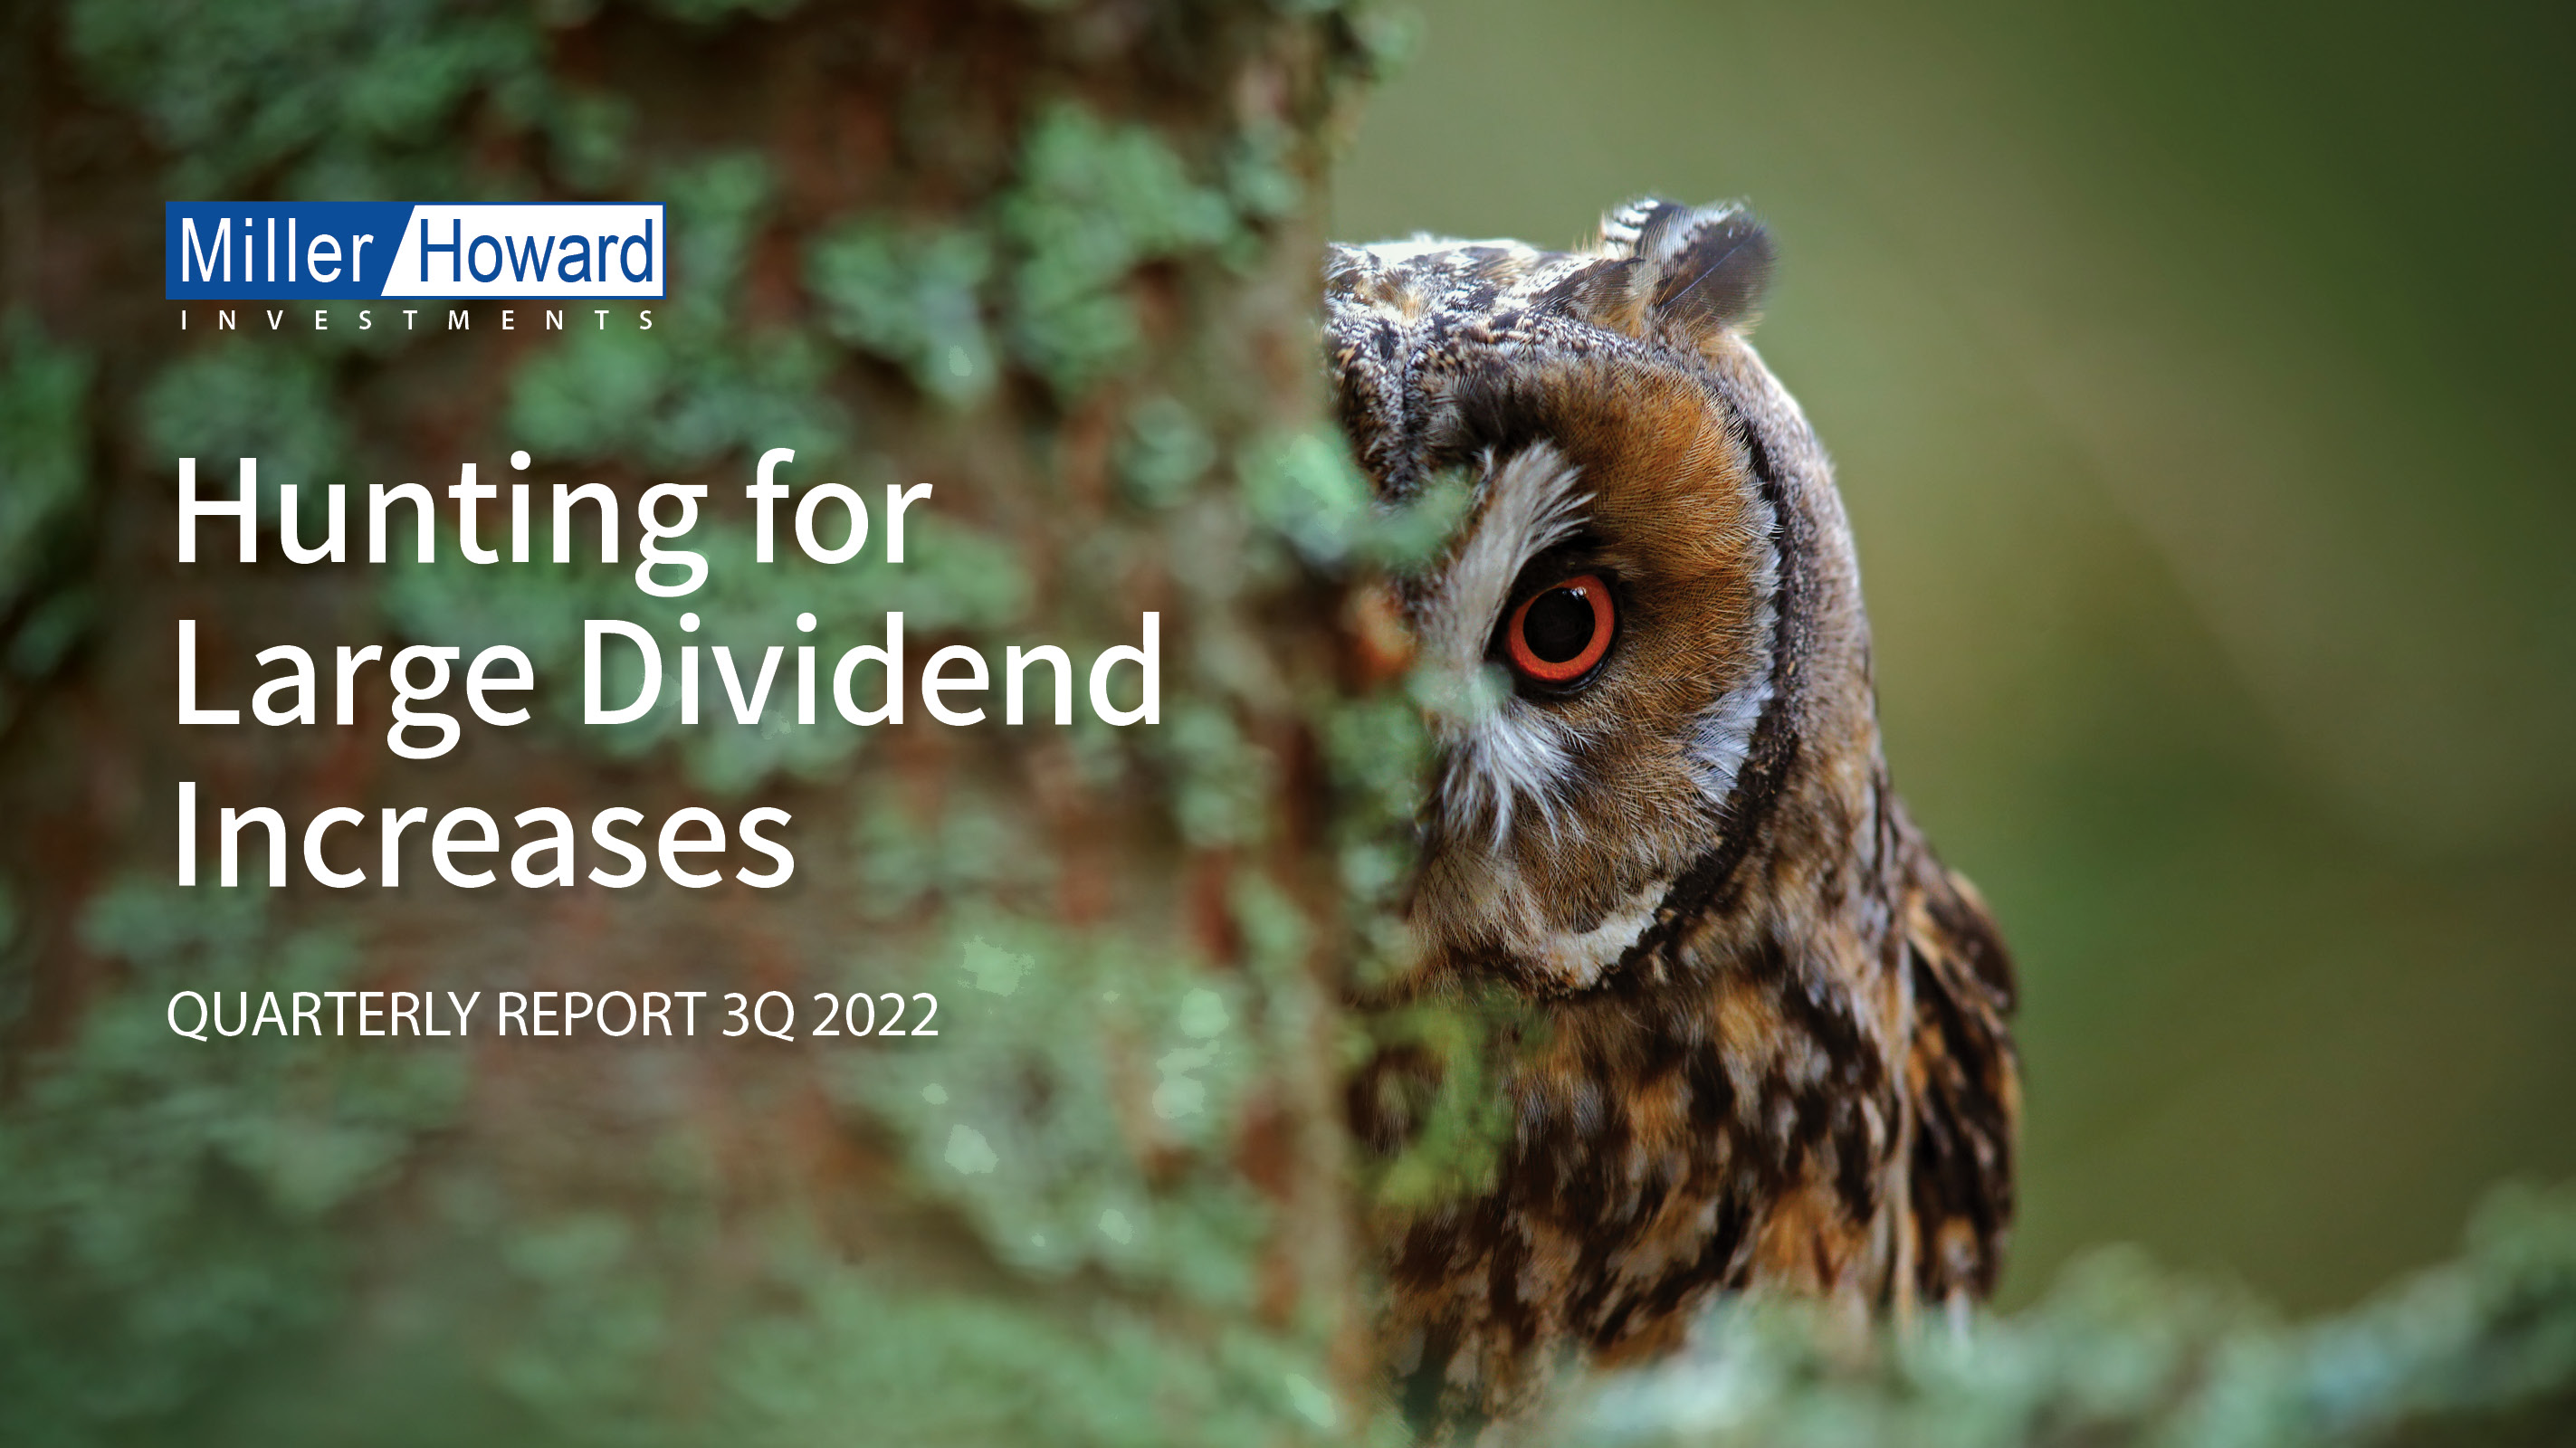 Quarterly Report 2022 Q3 - Hunting for Large Dividend Increases